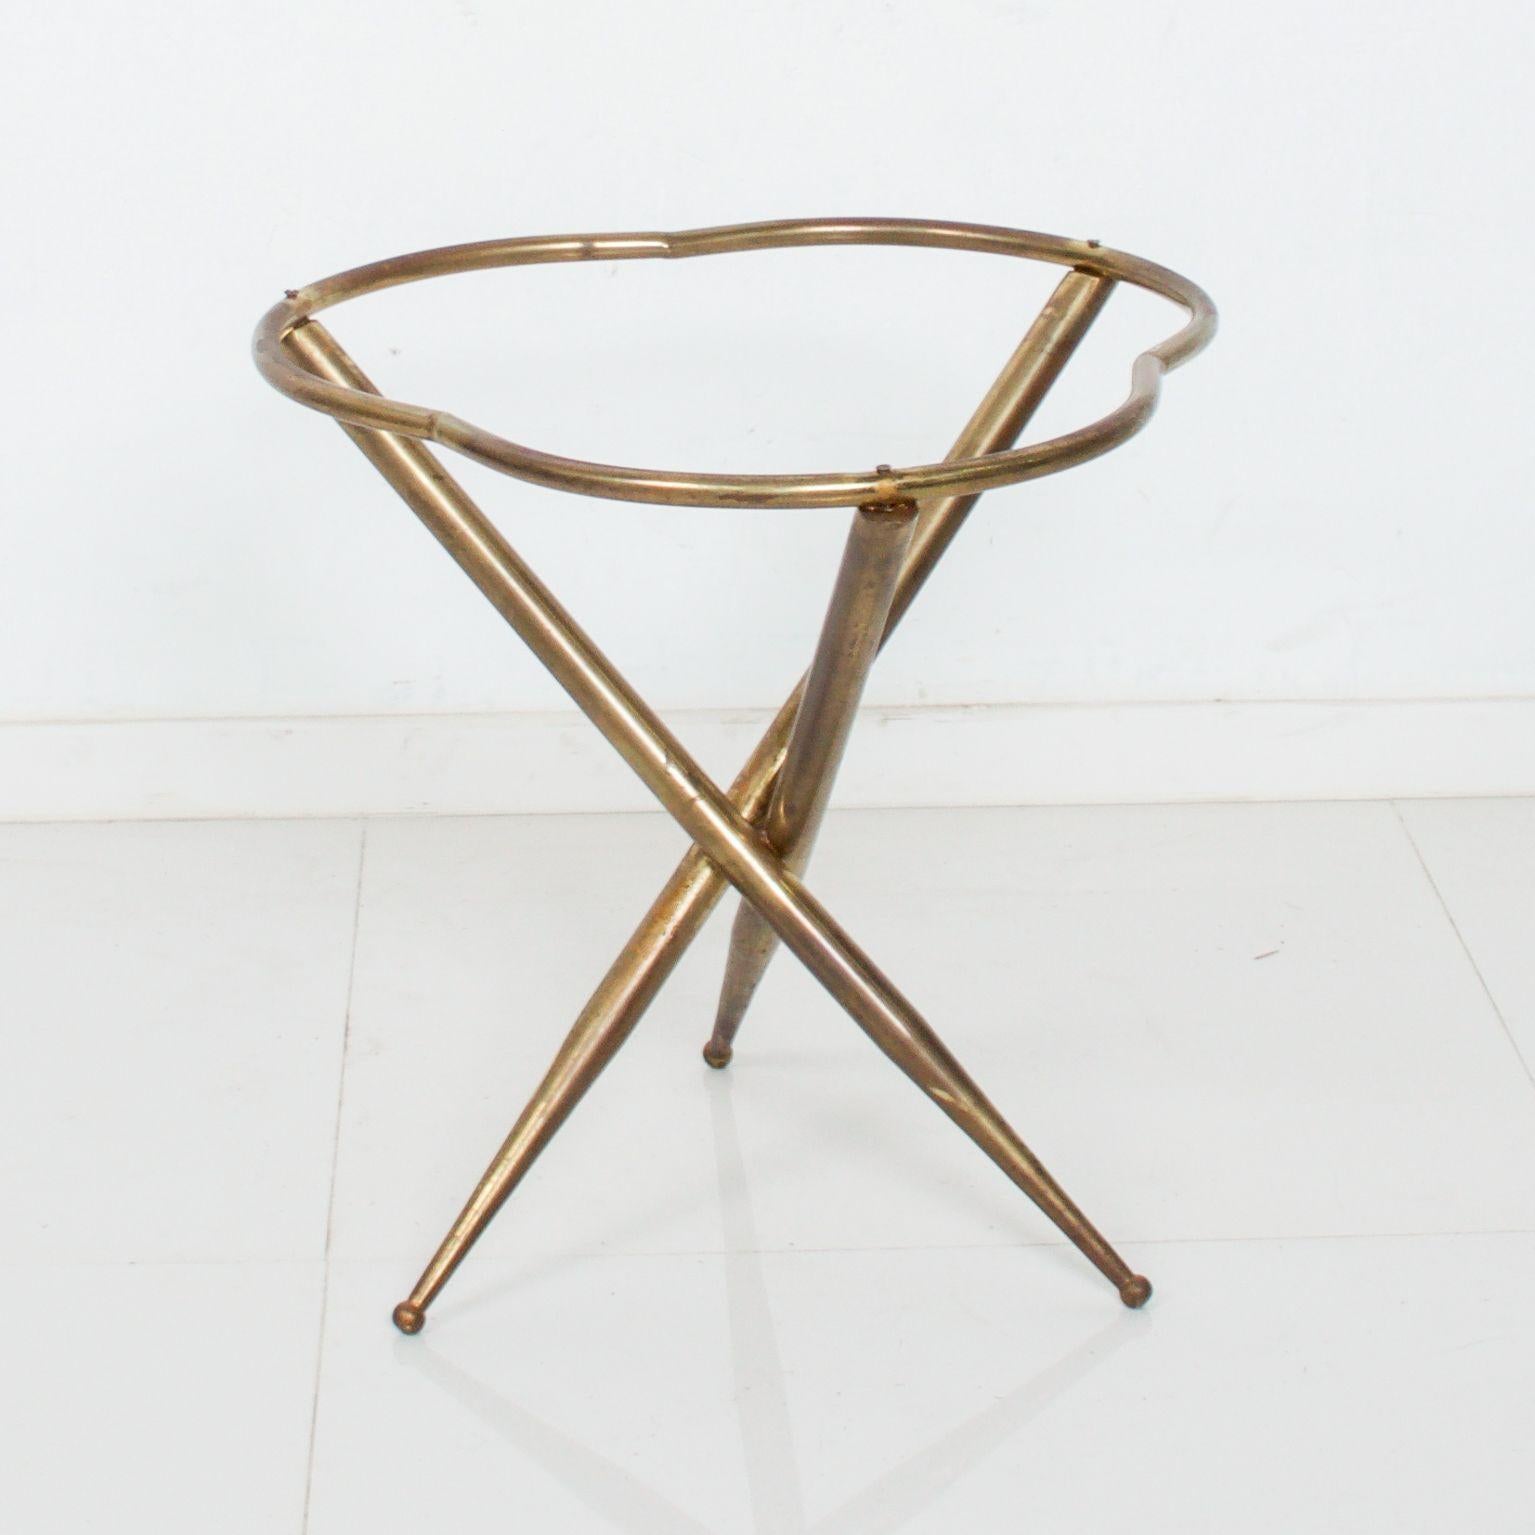 Vintage modern Italian Sculptural Side Tripod Table in Solid Brass and Patinated Bronze. 
Made in Italy circa 1950s.
Table features a custom glass top.
Table is attributed to Gio Ponti. 
No label remains. 
17.5 H x 17.25 in diameter.
Original